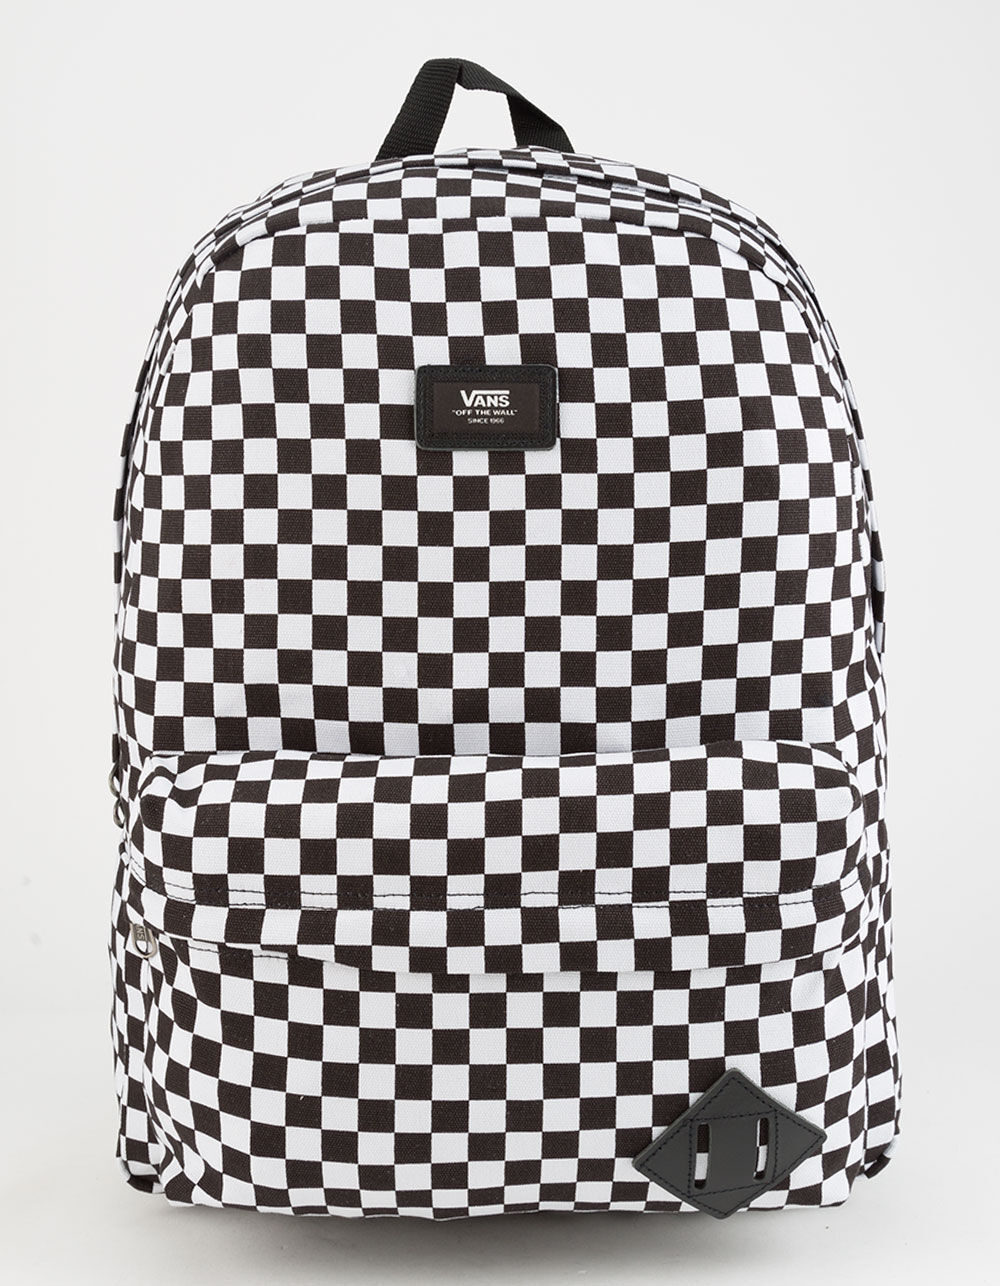 Vans Boxer mini checkerboard detail backpack in black and white